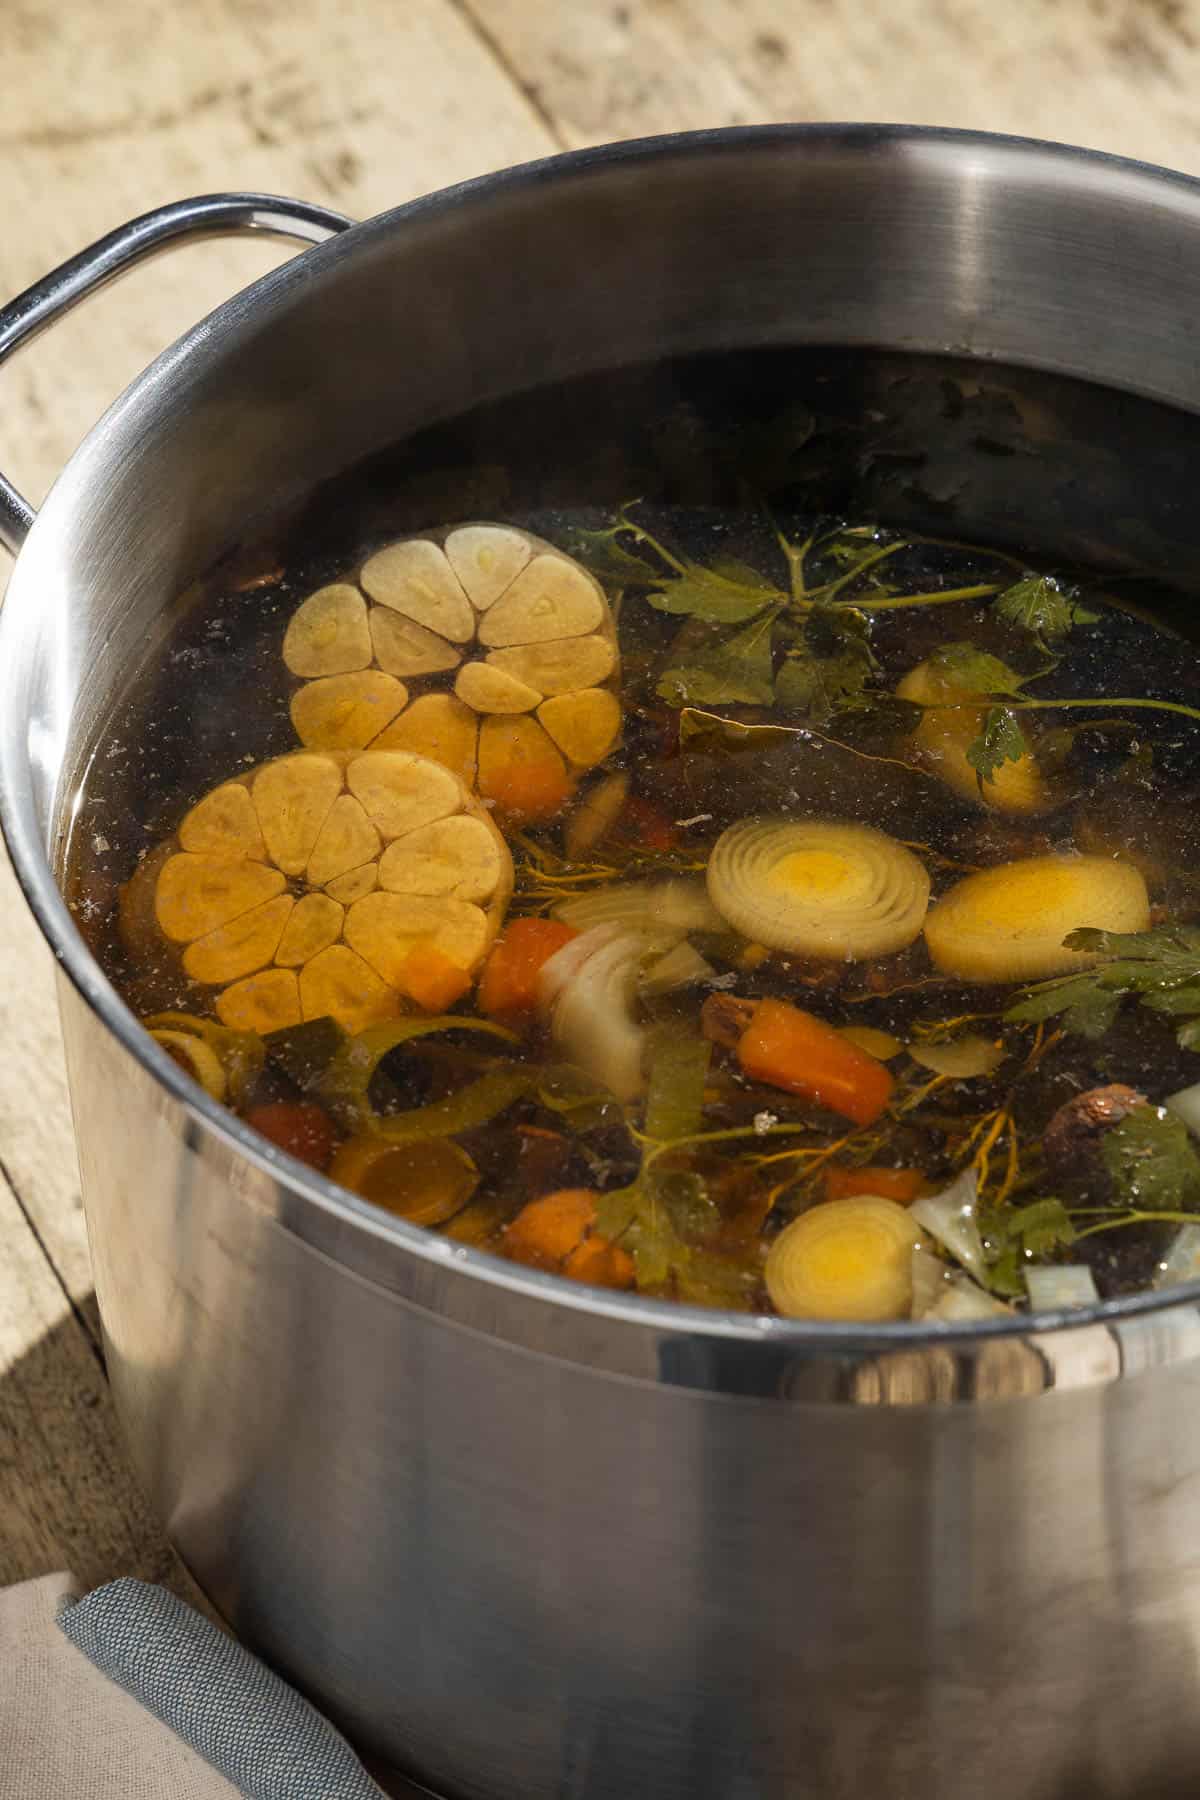 The ingredients for homemade vegetable stock simmering together in a large pot with water.